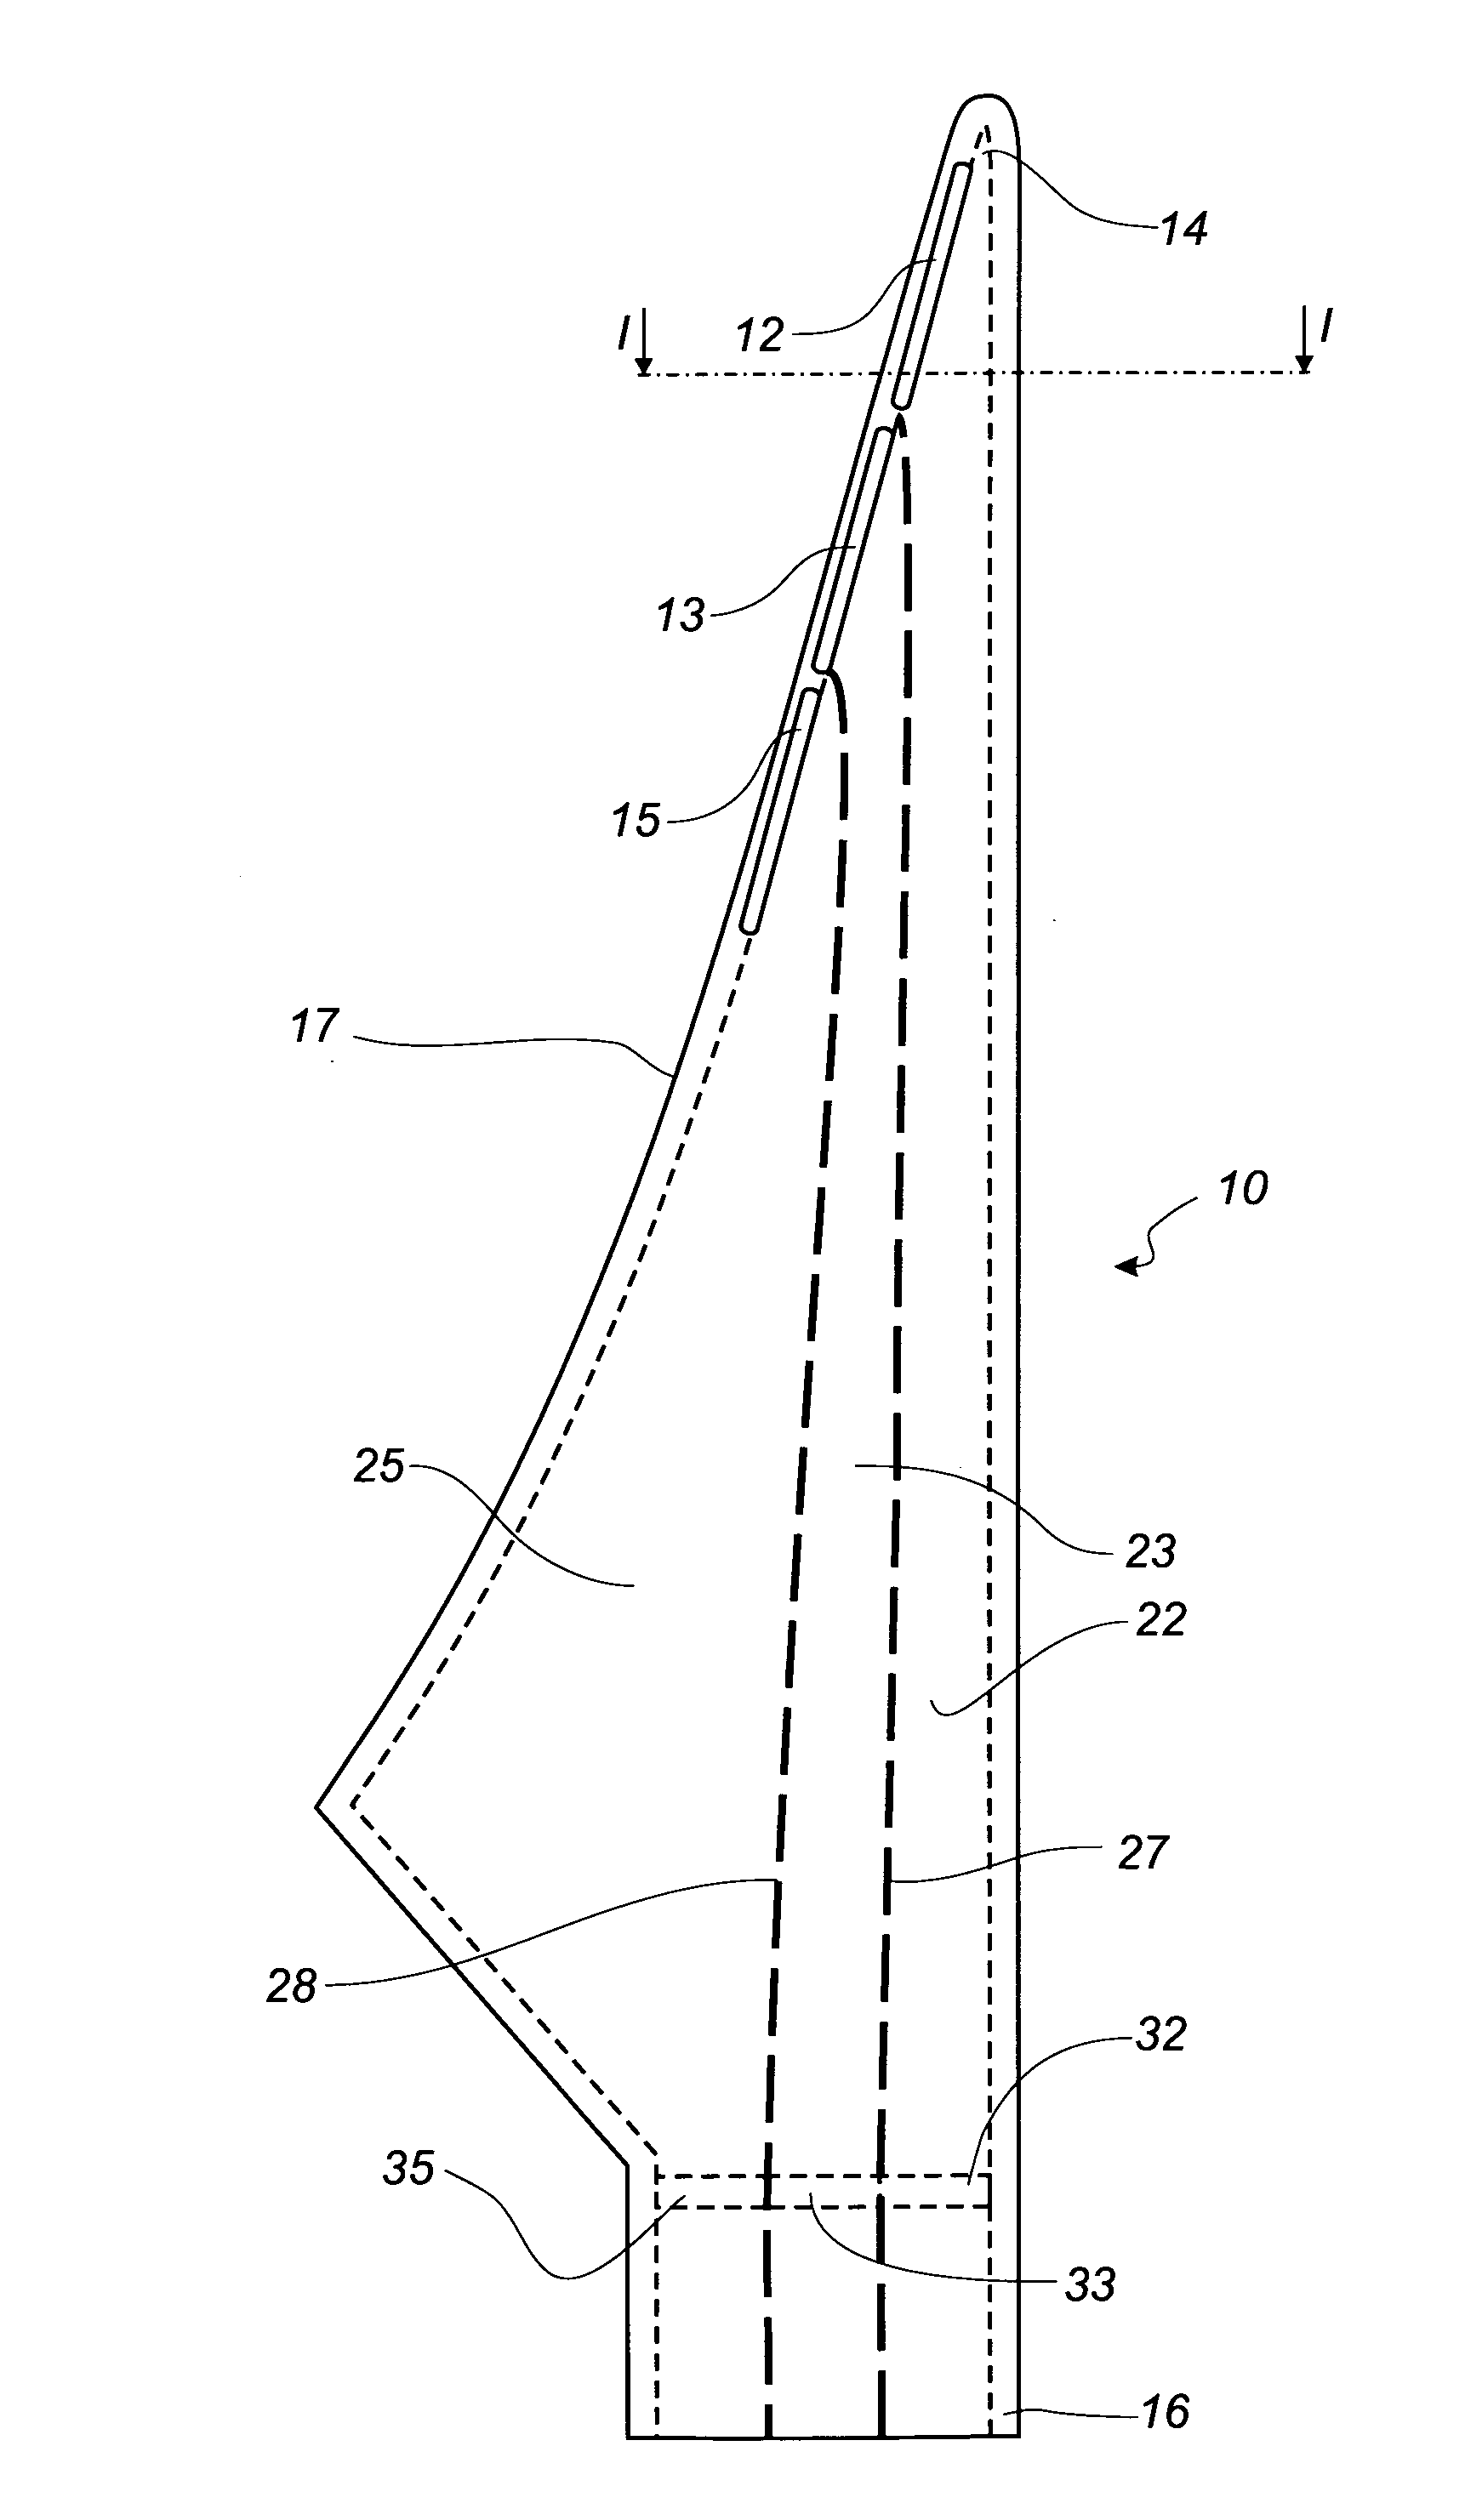 Wind turbine blade with lift-regulating means in form of slots or holes